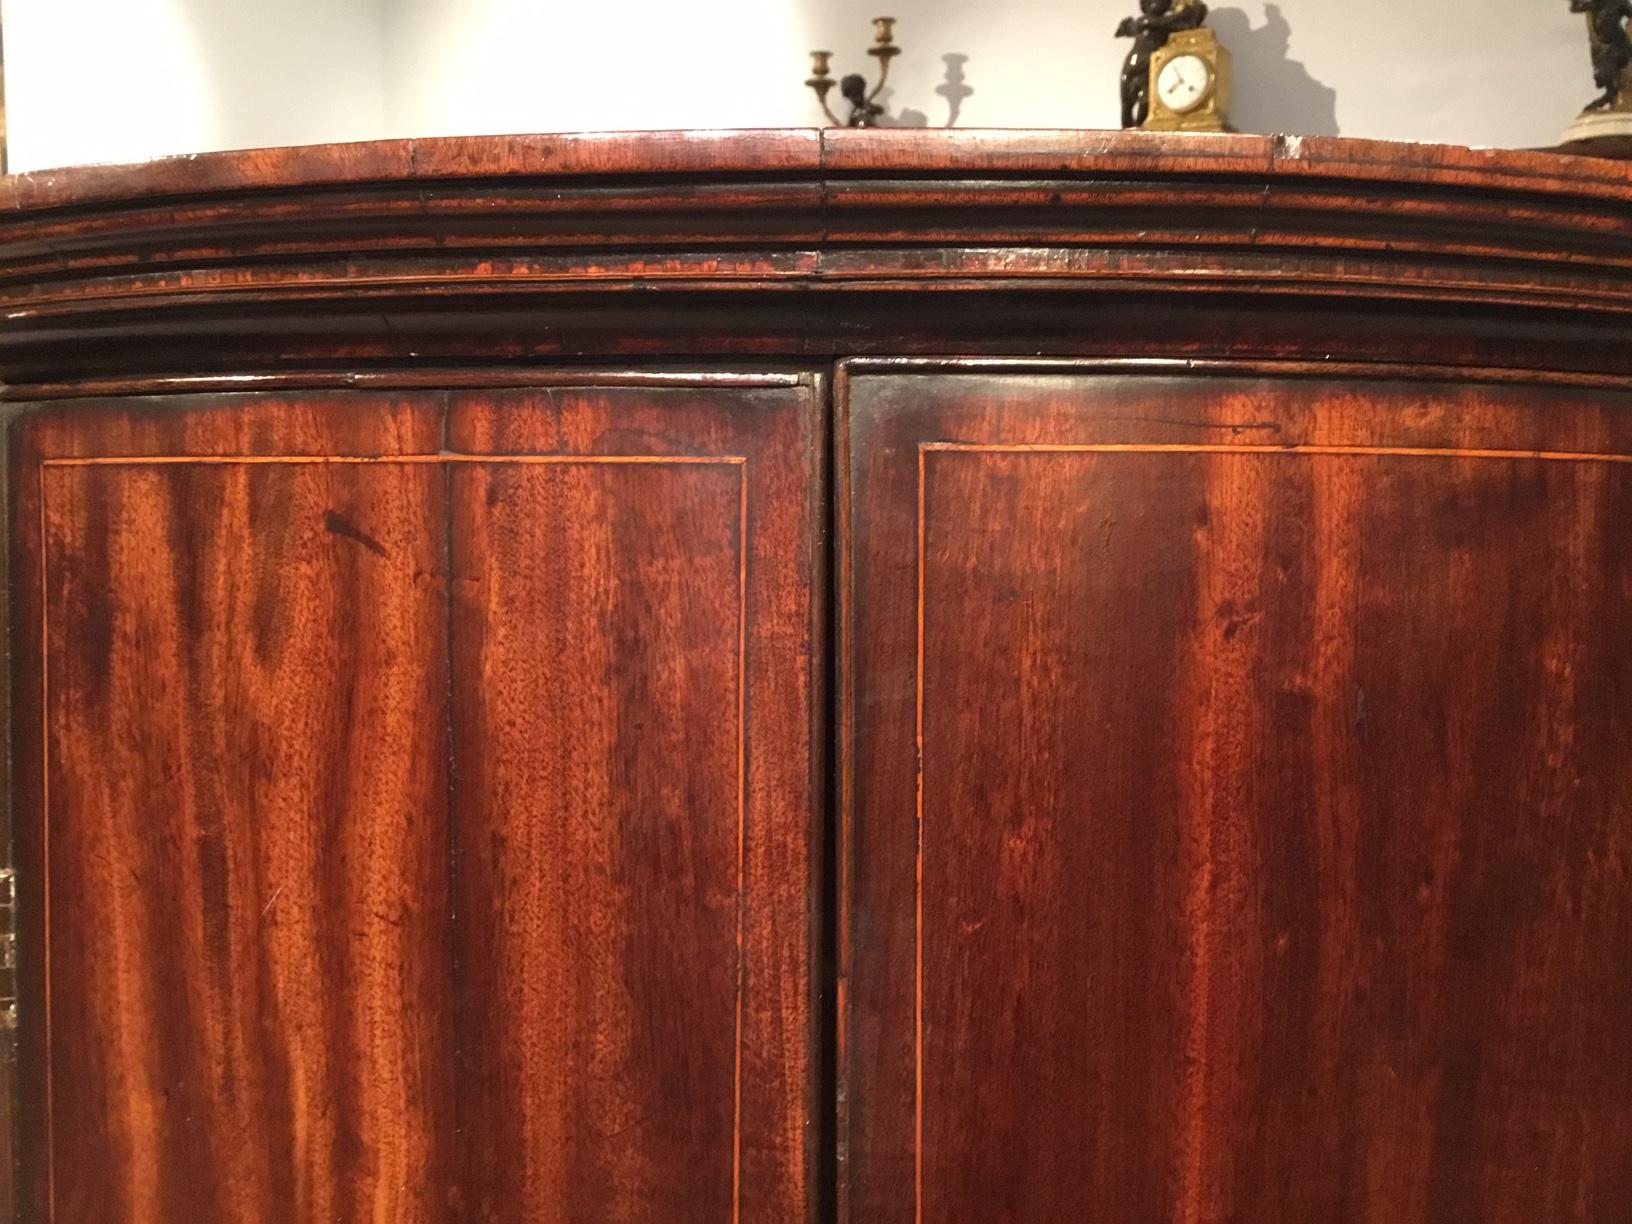 A mahogany George III Period bow front corner cupboard. Having a moulded cornice above twin solid mahogany doors with line inlaid details, opening to reveal a painted shelved interior. English circa 1780-1800

Dimensions: 28